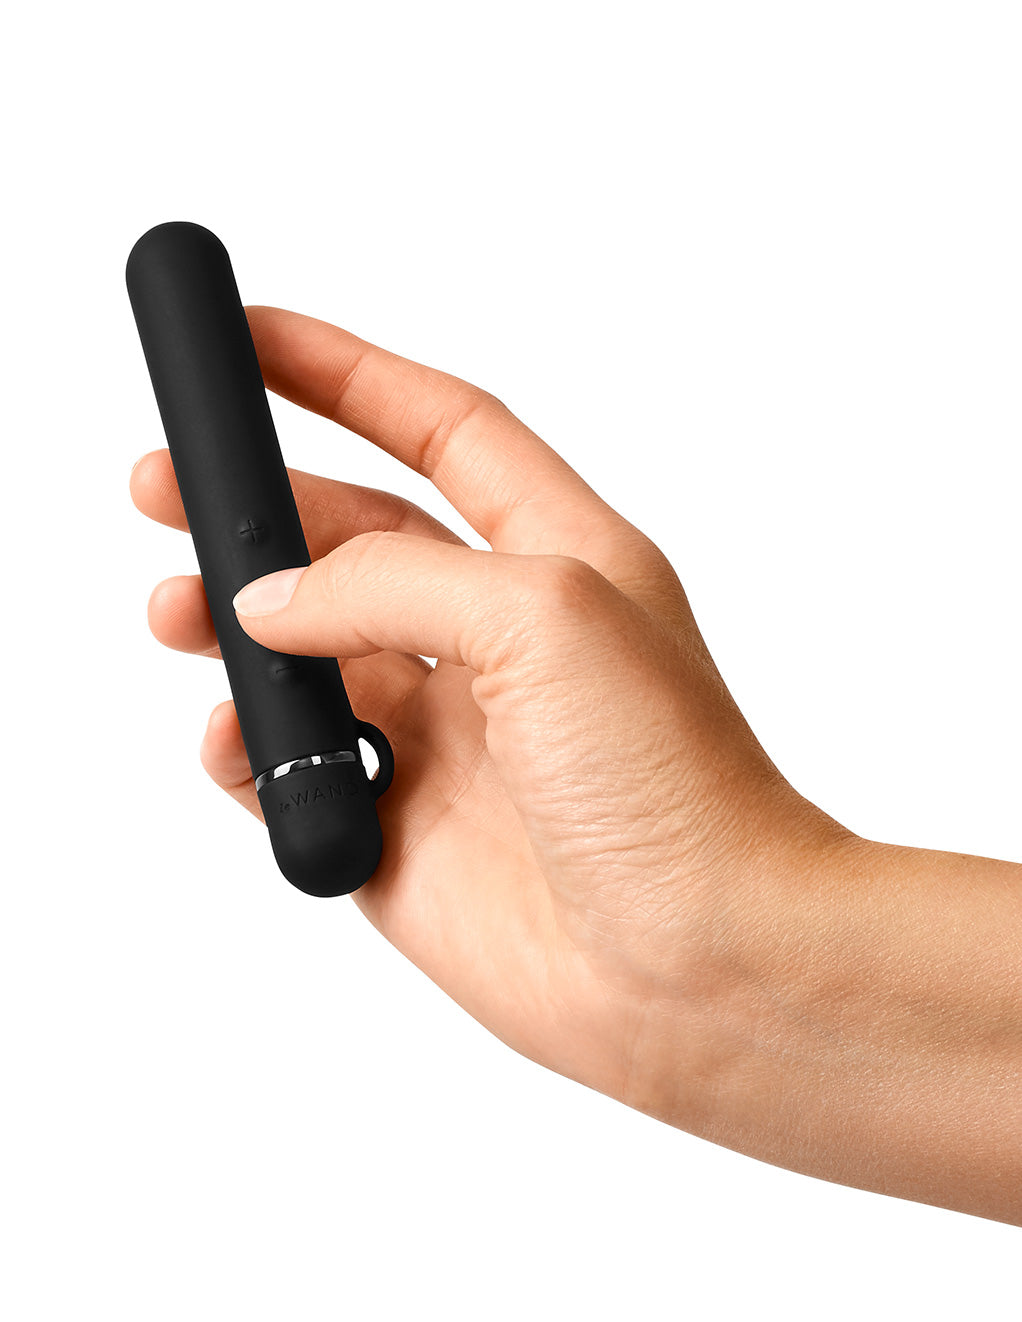 Le Wand Baton Rechargeable Clitoral Vibrator- Black- In hand